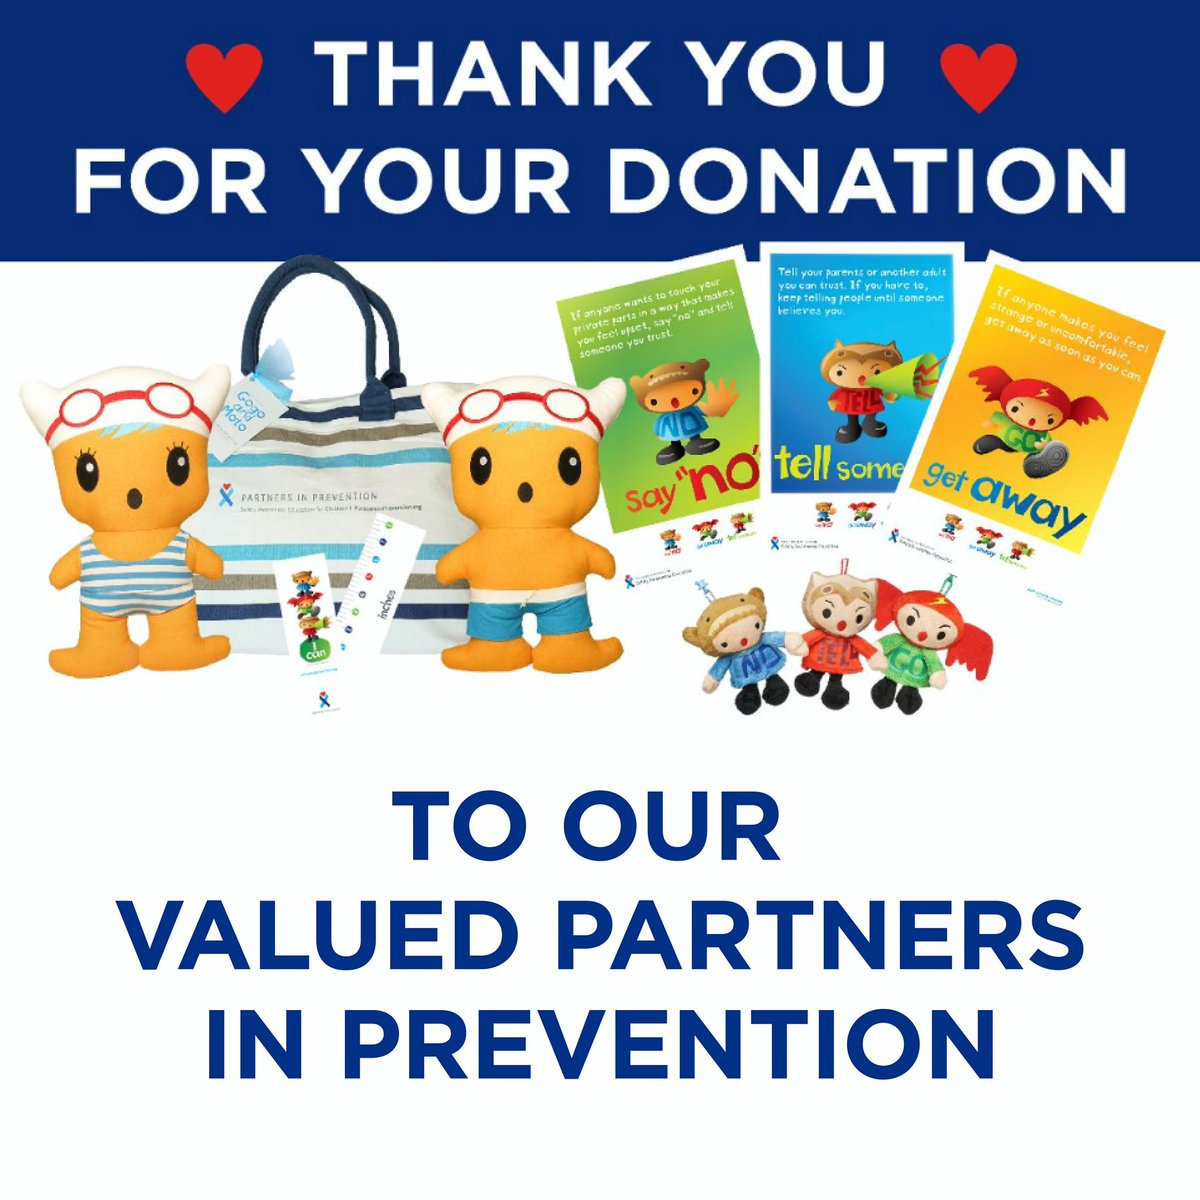 Thank you to our Valued Partners, who have given generously to Partners in Prevention! Your gift will pay for one of our #SafetyAwarenessEducation Kits—filled with materials that help kids learn to stay safe! To donate, visit partnersinprevention.org/donate/#thanky… #sponsorship #donate